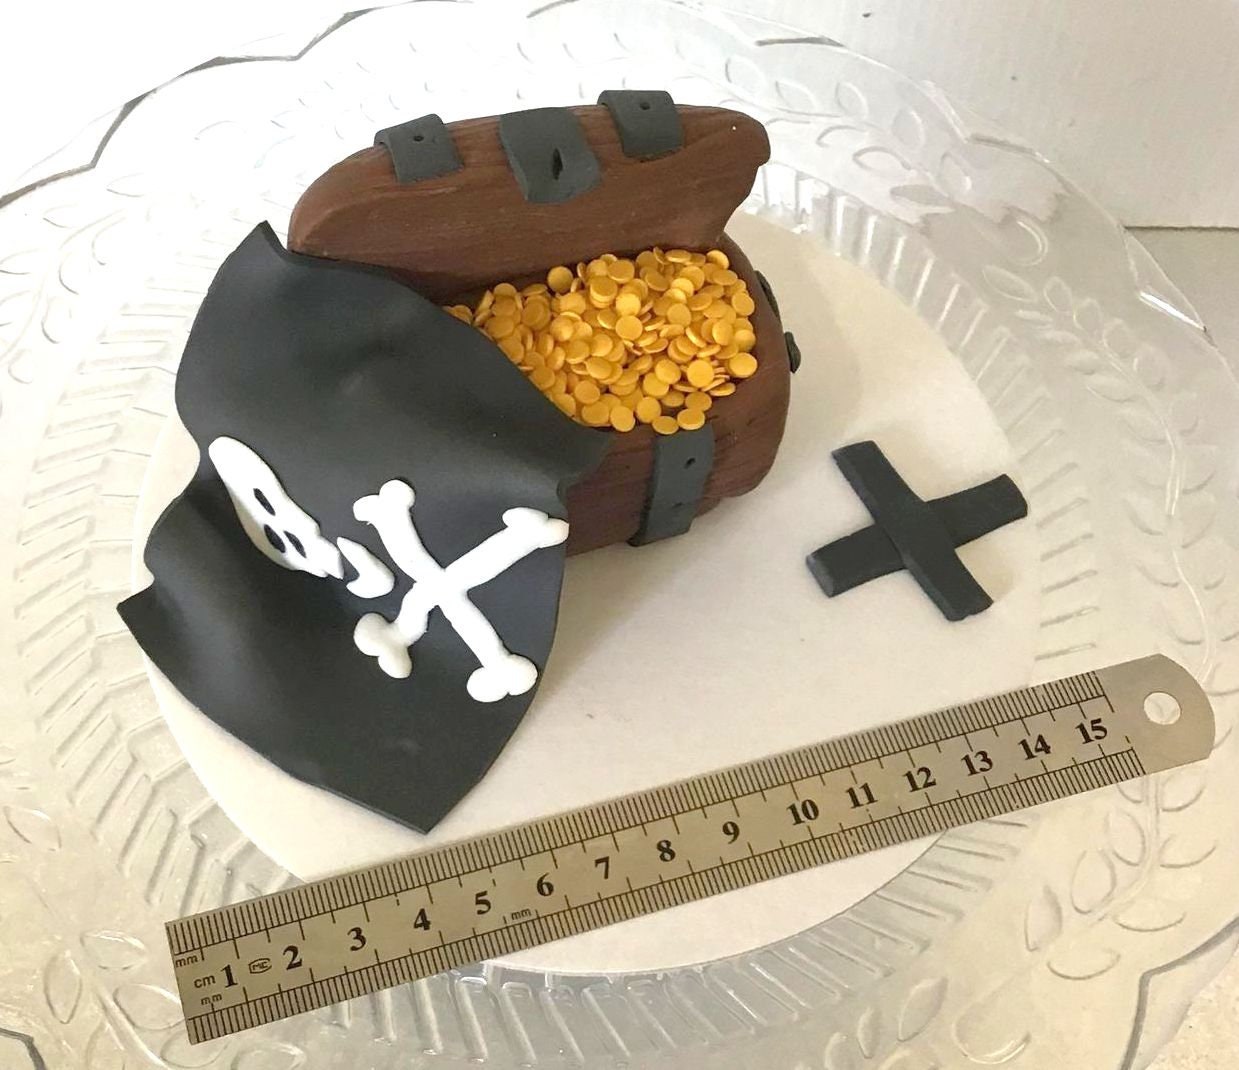 Handmade edible sugar Pirate treasure chest with Jolly roger flag and miniature gold coins